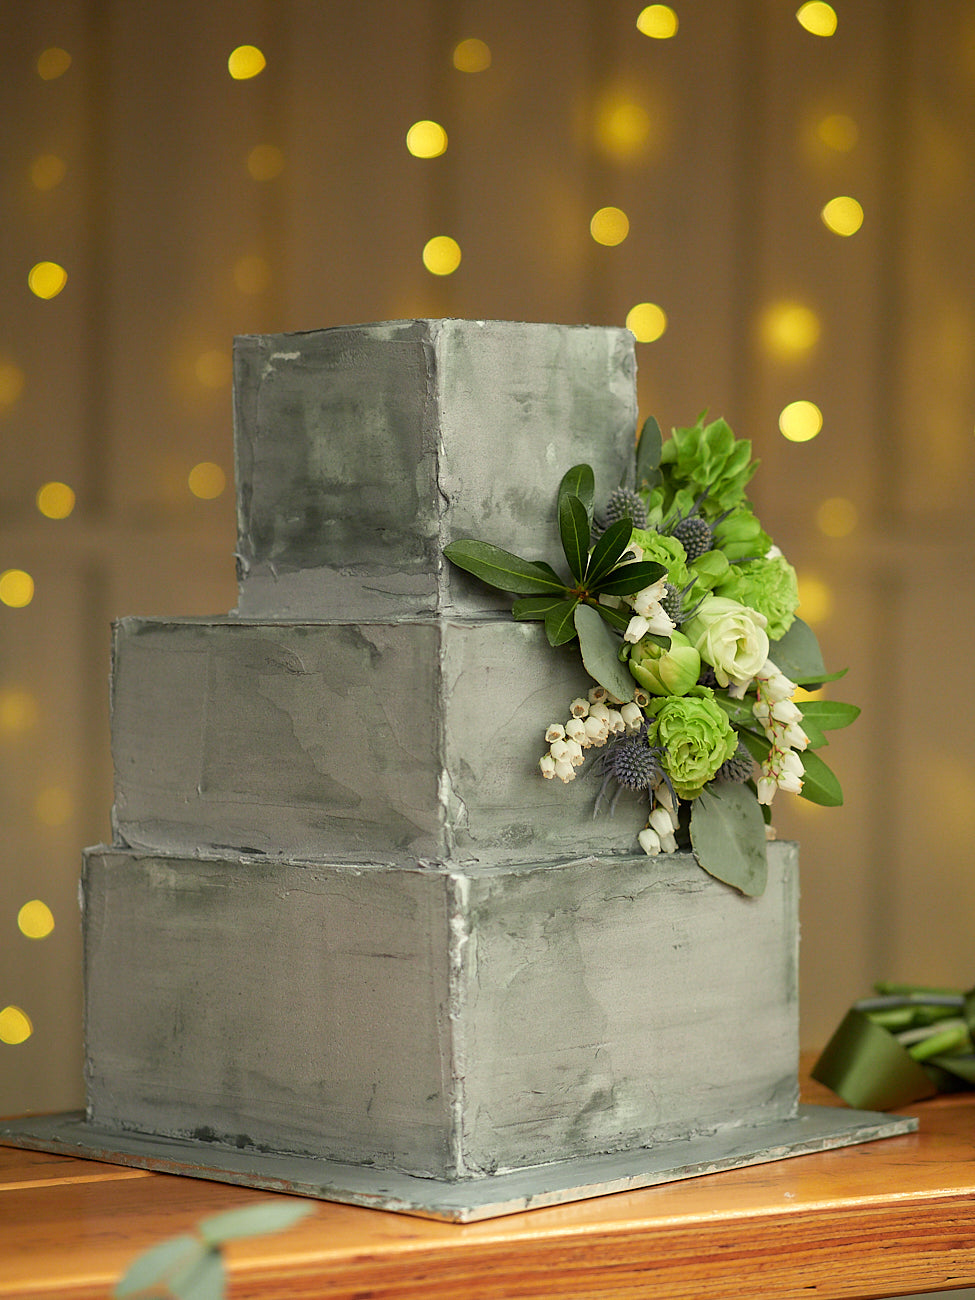 3 Tier Square Concrete Cake with Green Flowers